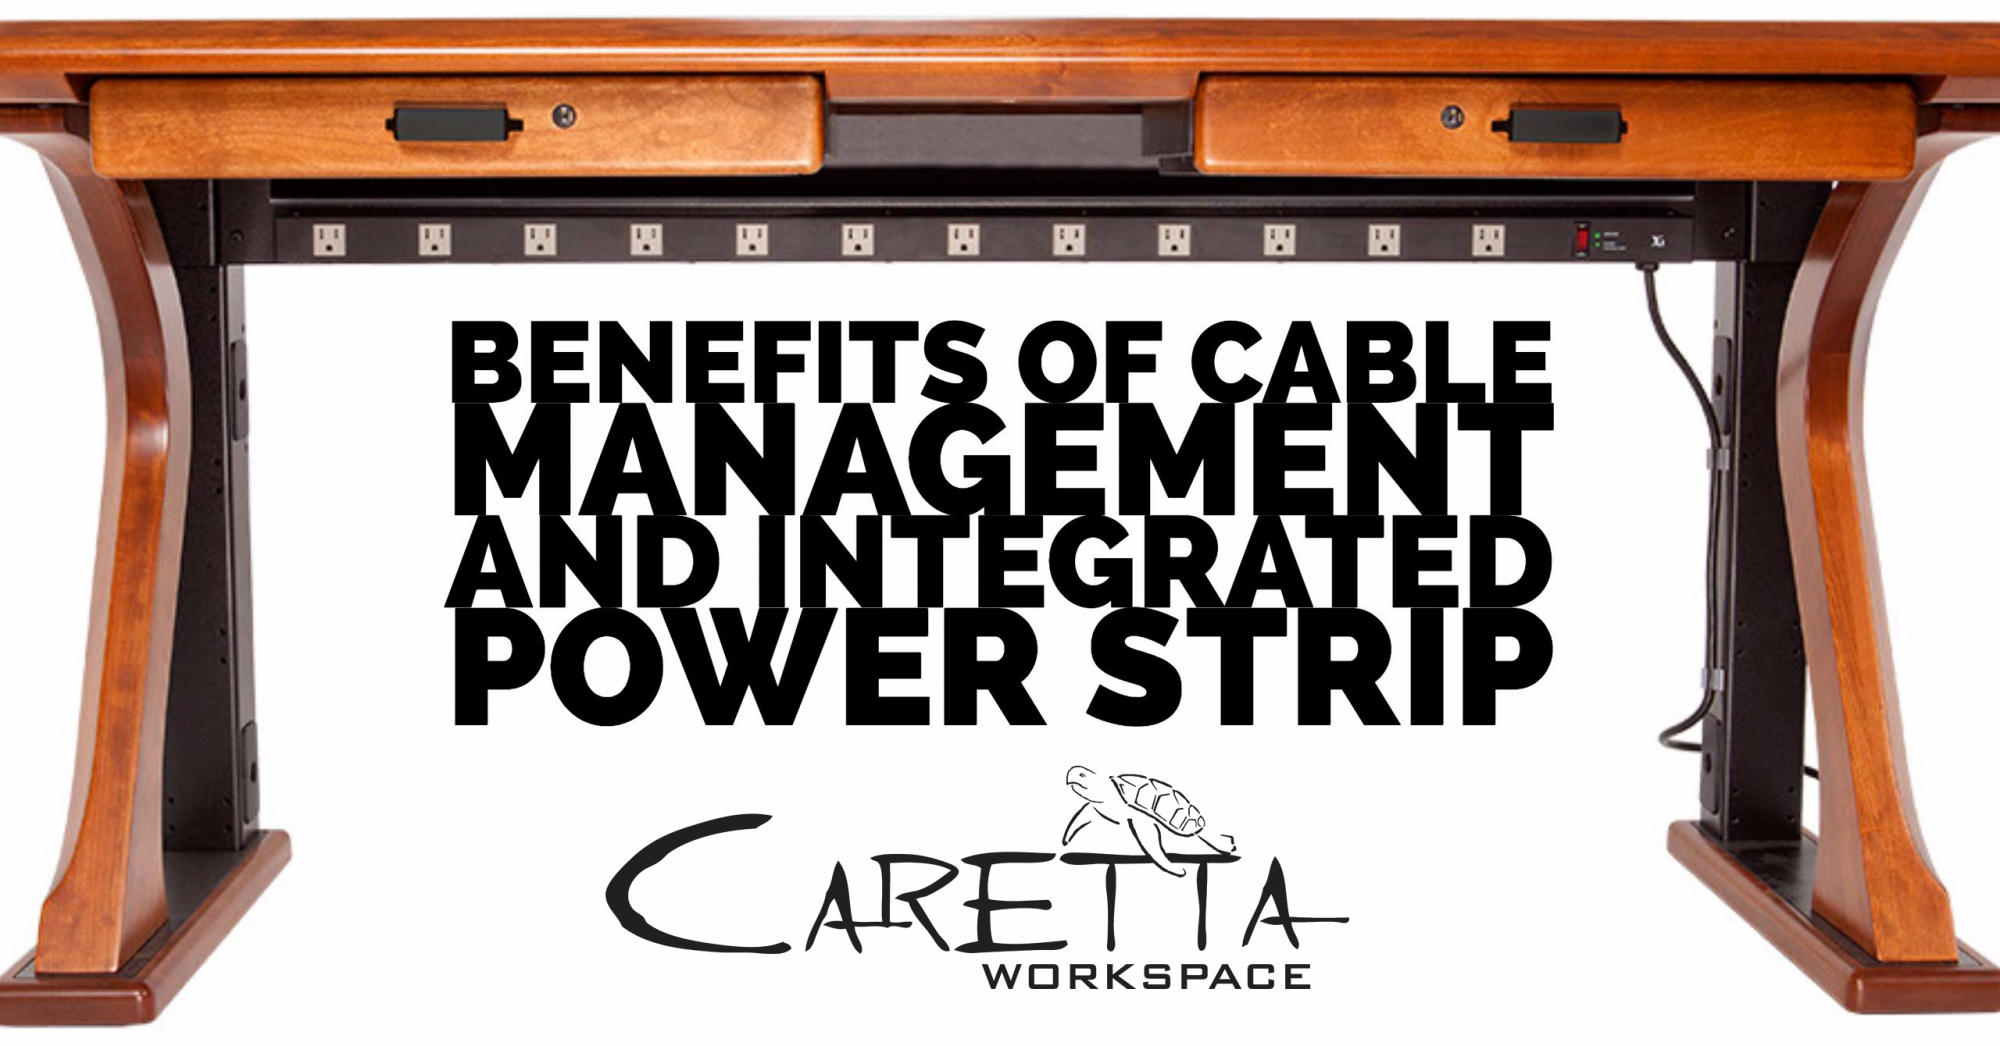 Benefits of Cable Management and Integrated Power Strip